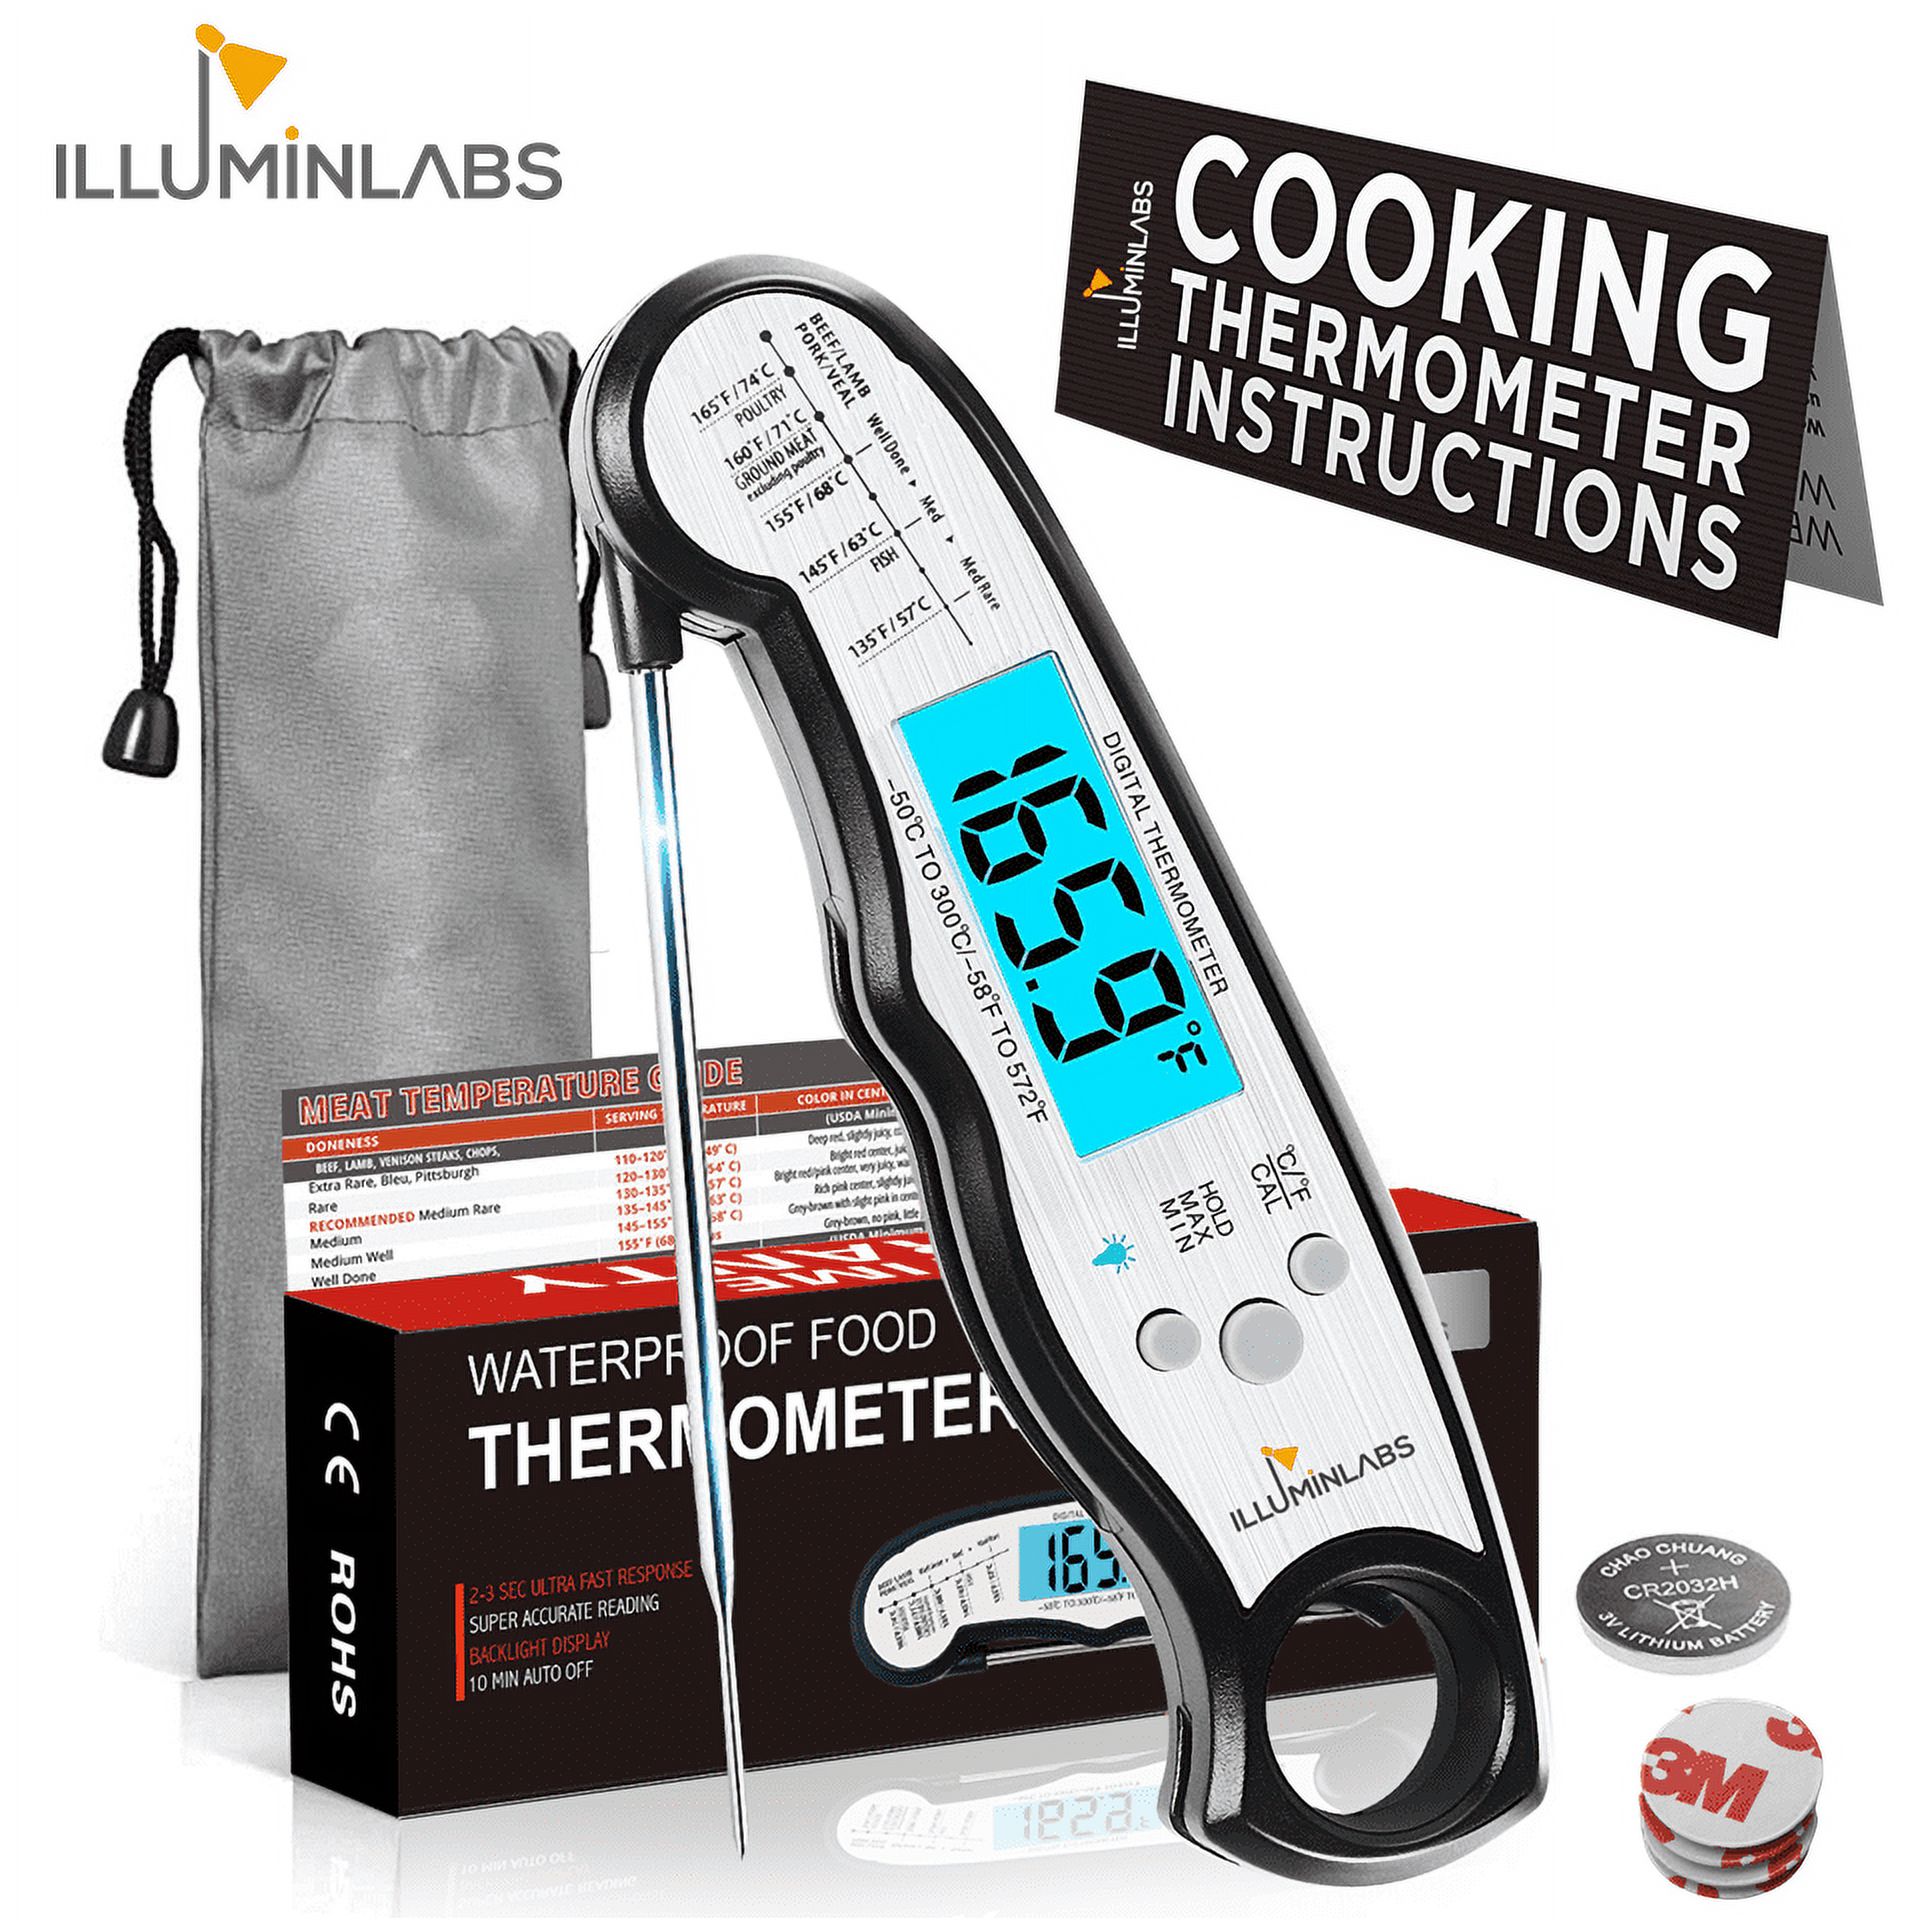 Illuminlabs Meat Thermometer - Instant Read Digital Food Thermometer for Cooking, Candy, Oven, Grill and Deep Fry. Accurate and Wide-Range Kitchen Thermometer with Probe, Waterproof, Pre-Calibrated - image 1 of 9